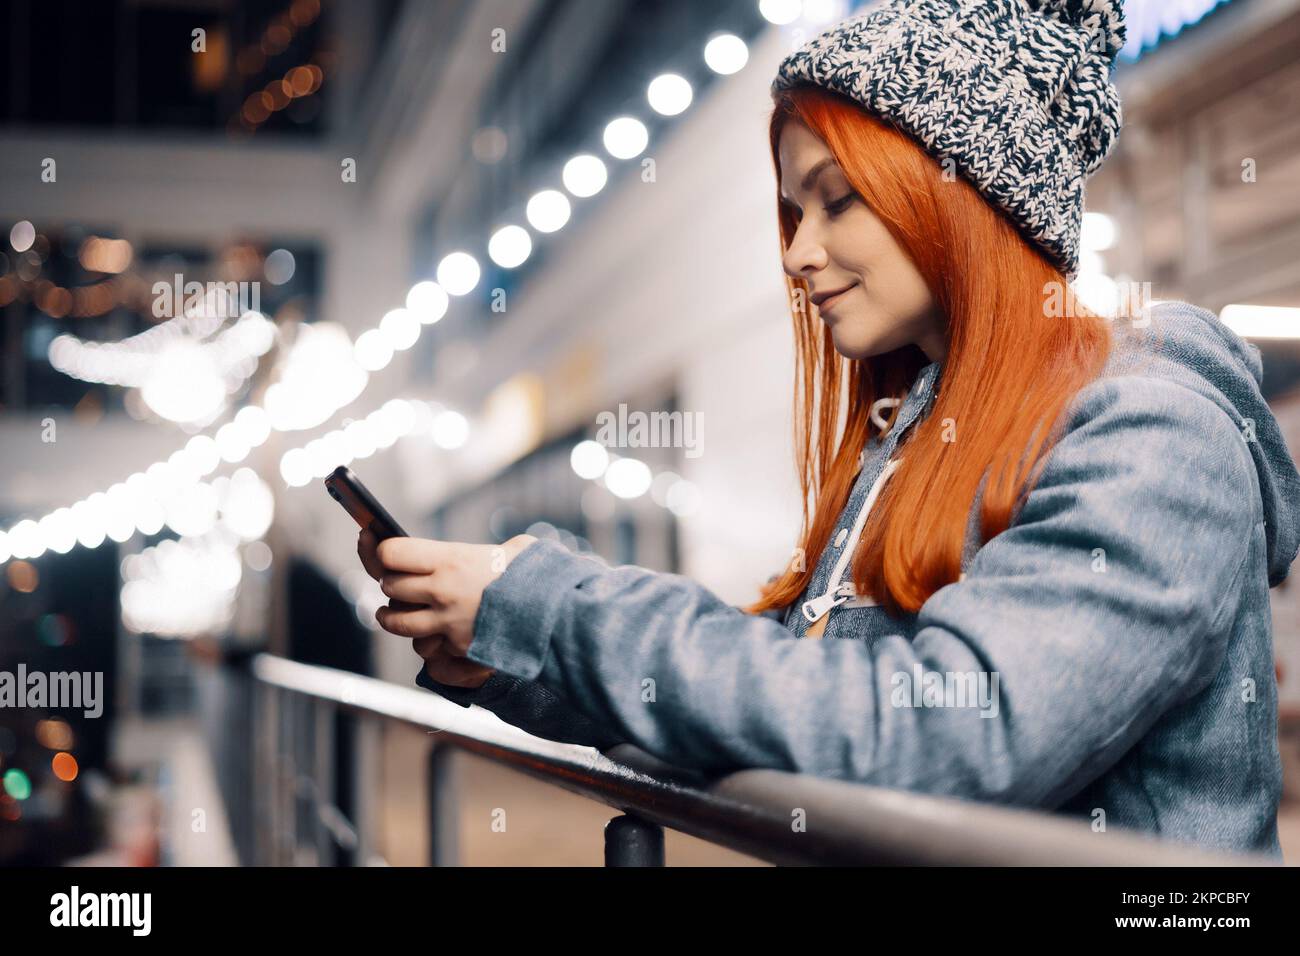 Beautiful Young Woman Using Smartphone Standing on the Night City Street Full of Light. Portrait of Gorgeous Smiling Female Using Mobile Phone. Stock Photo